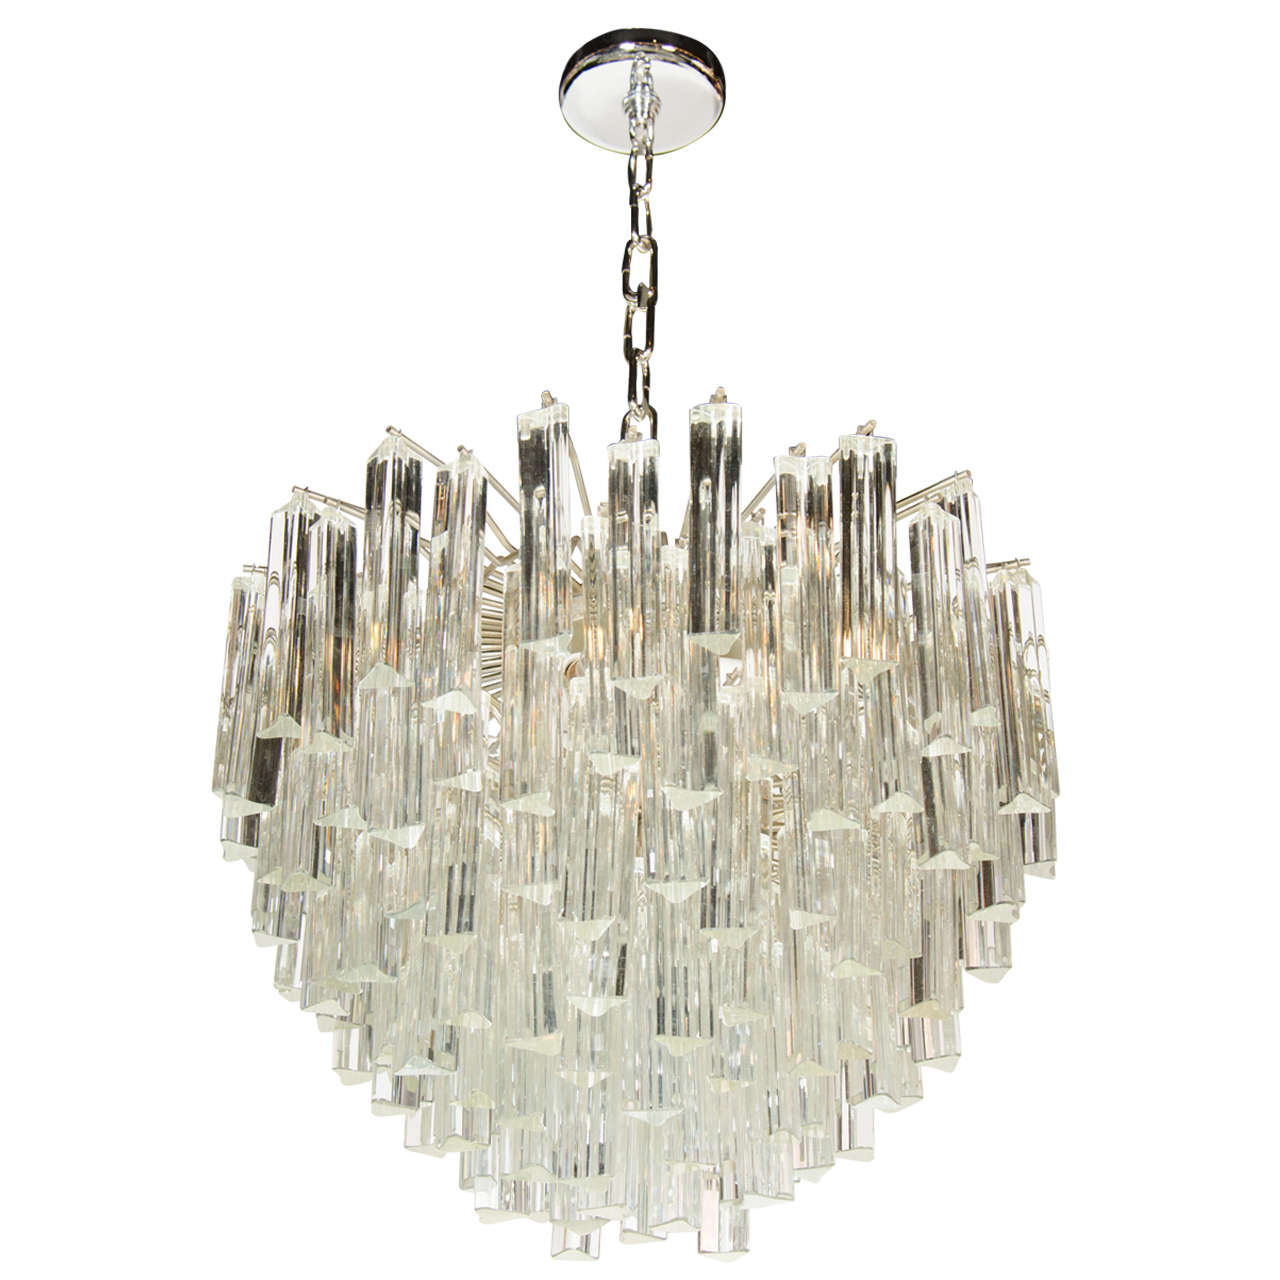 Exceptional Mid-Century Modern Cascading Camer Chandelier